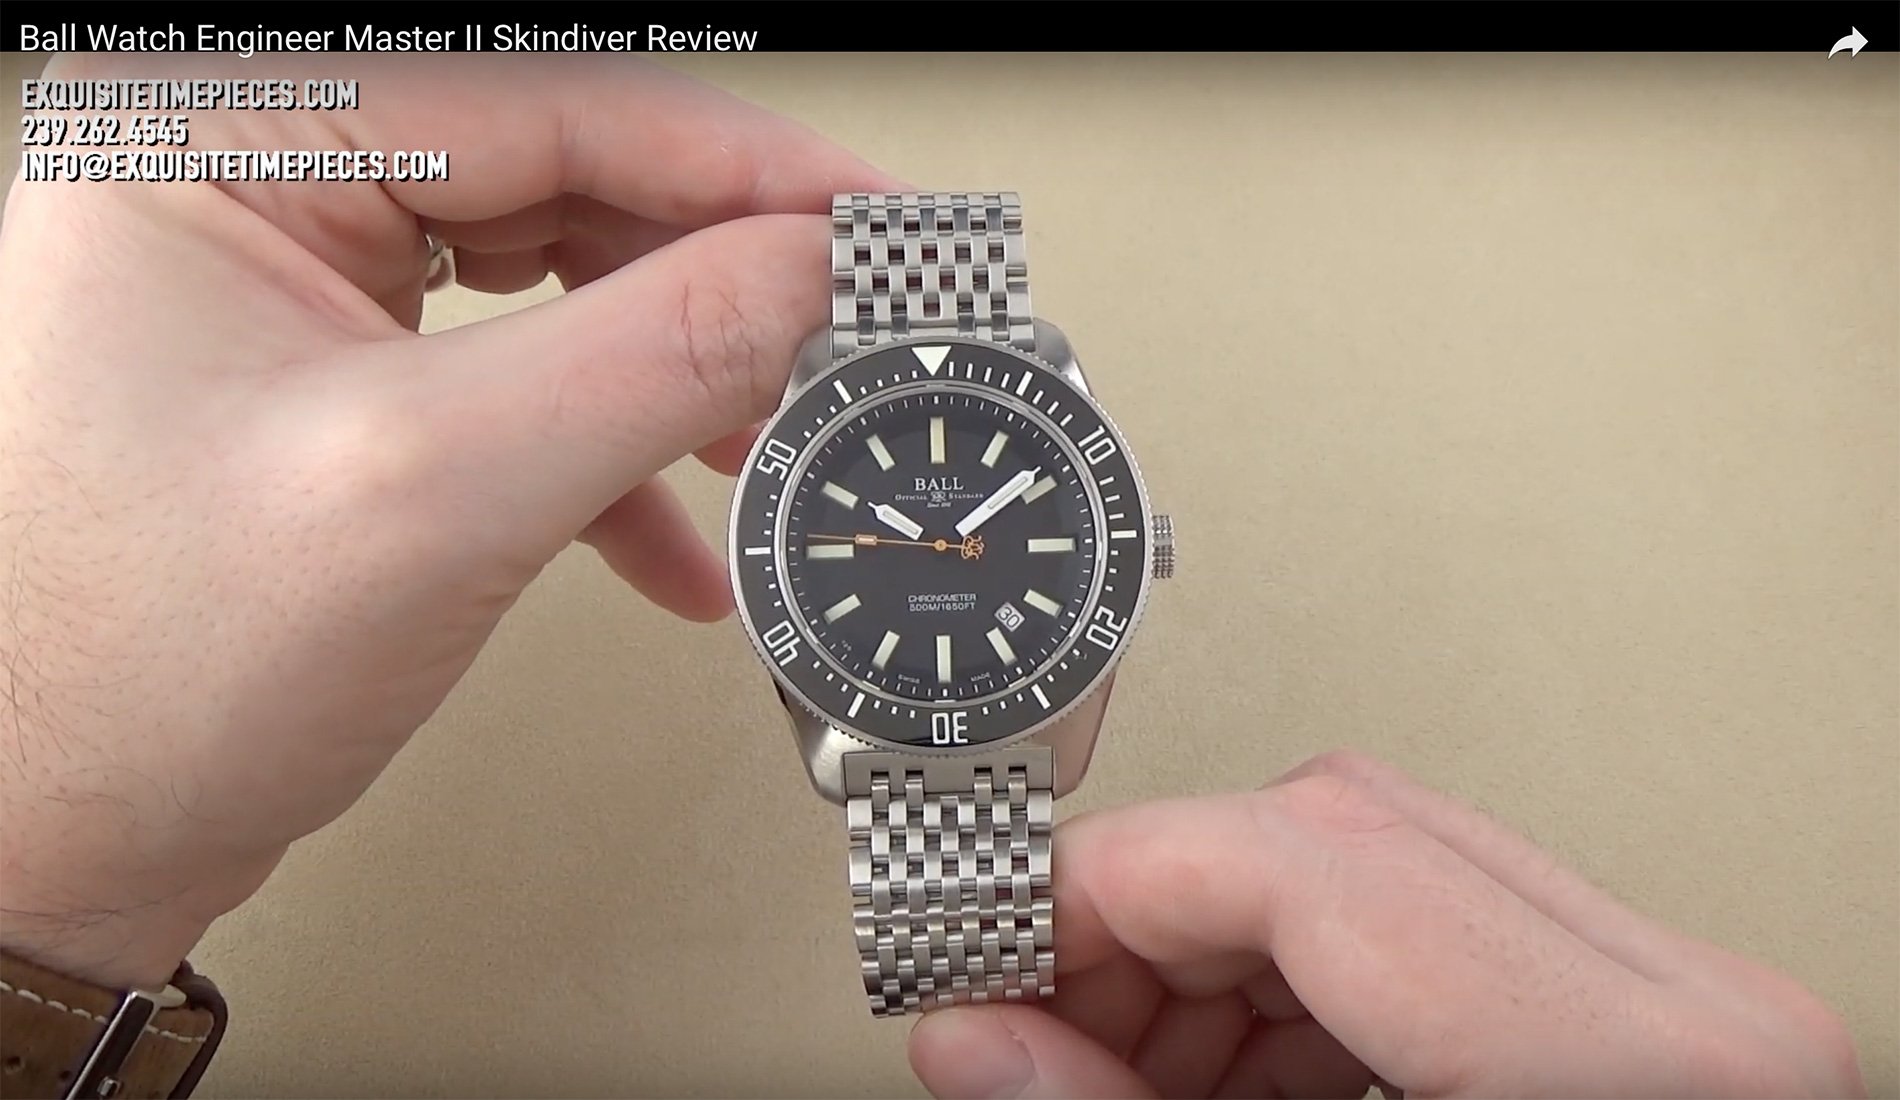 Ball Watch Engineer Master II Skindiver Review